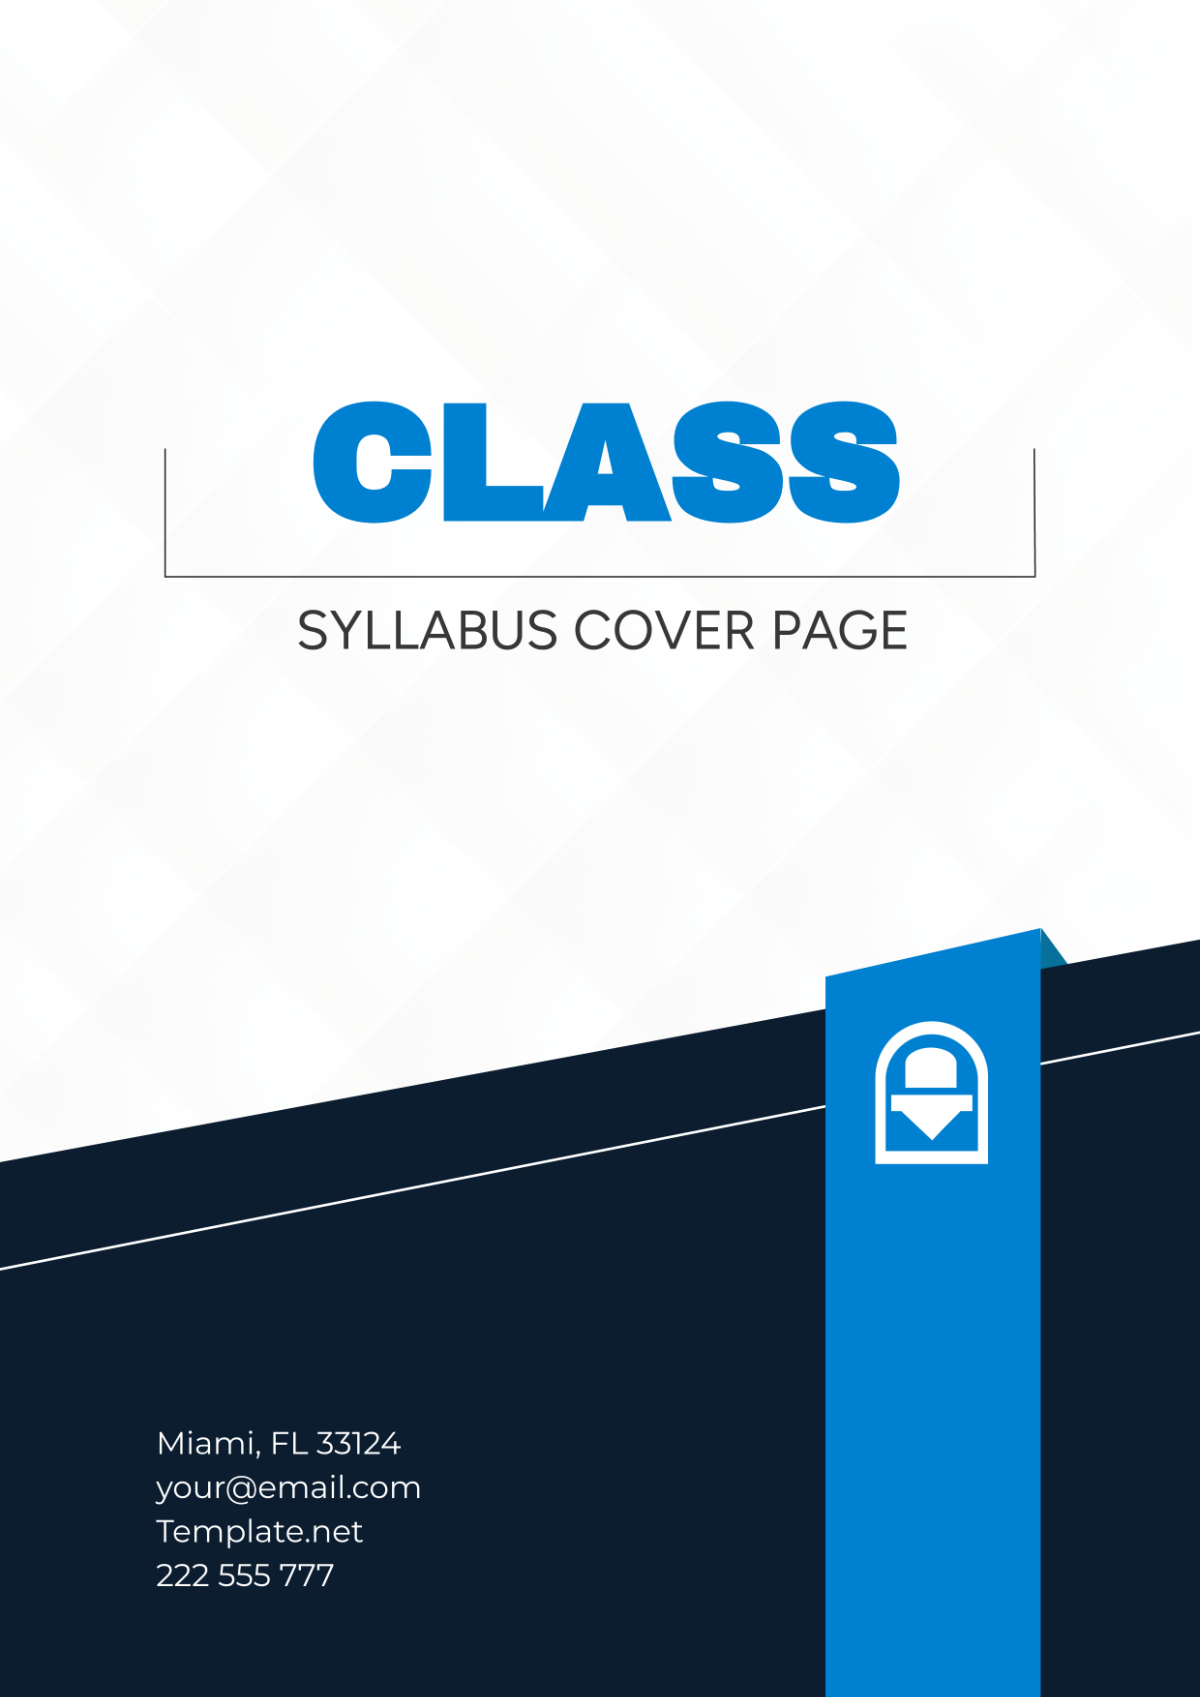 Class Syllabus Cover Page Template